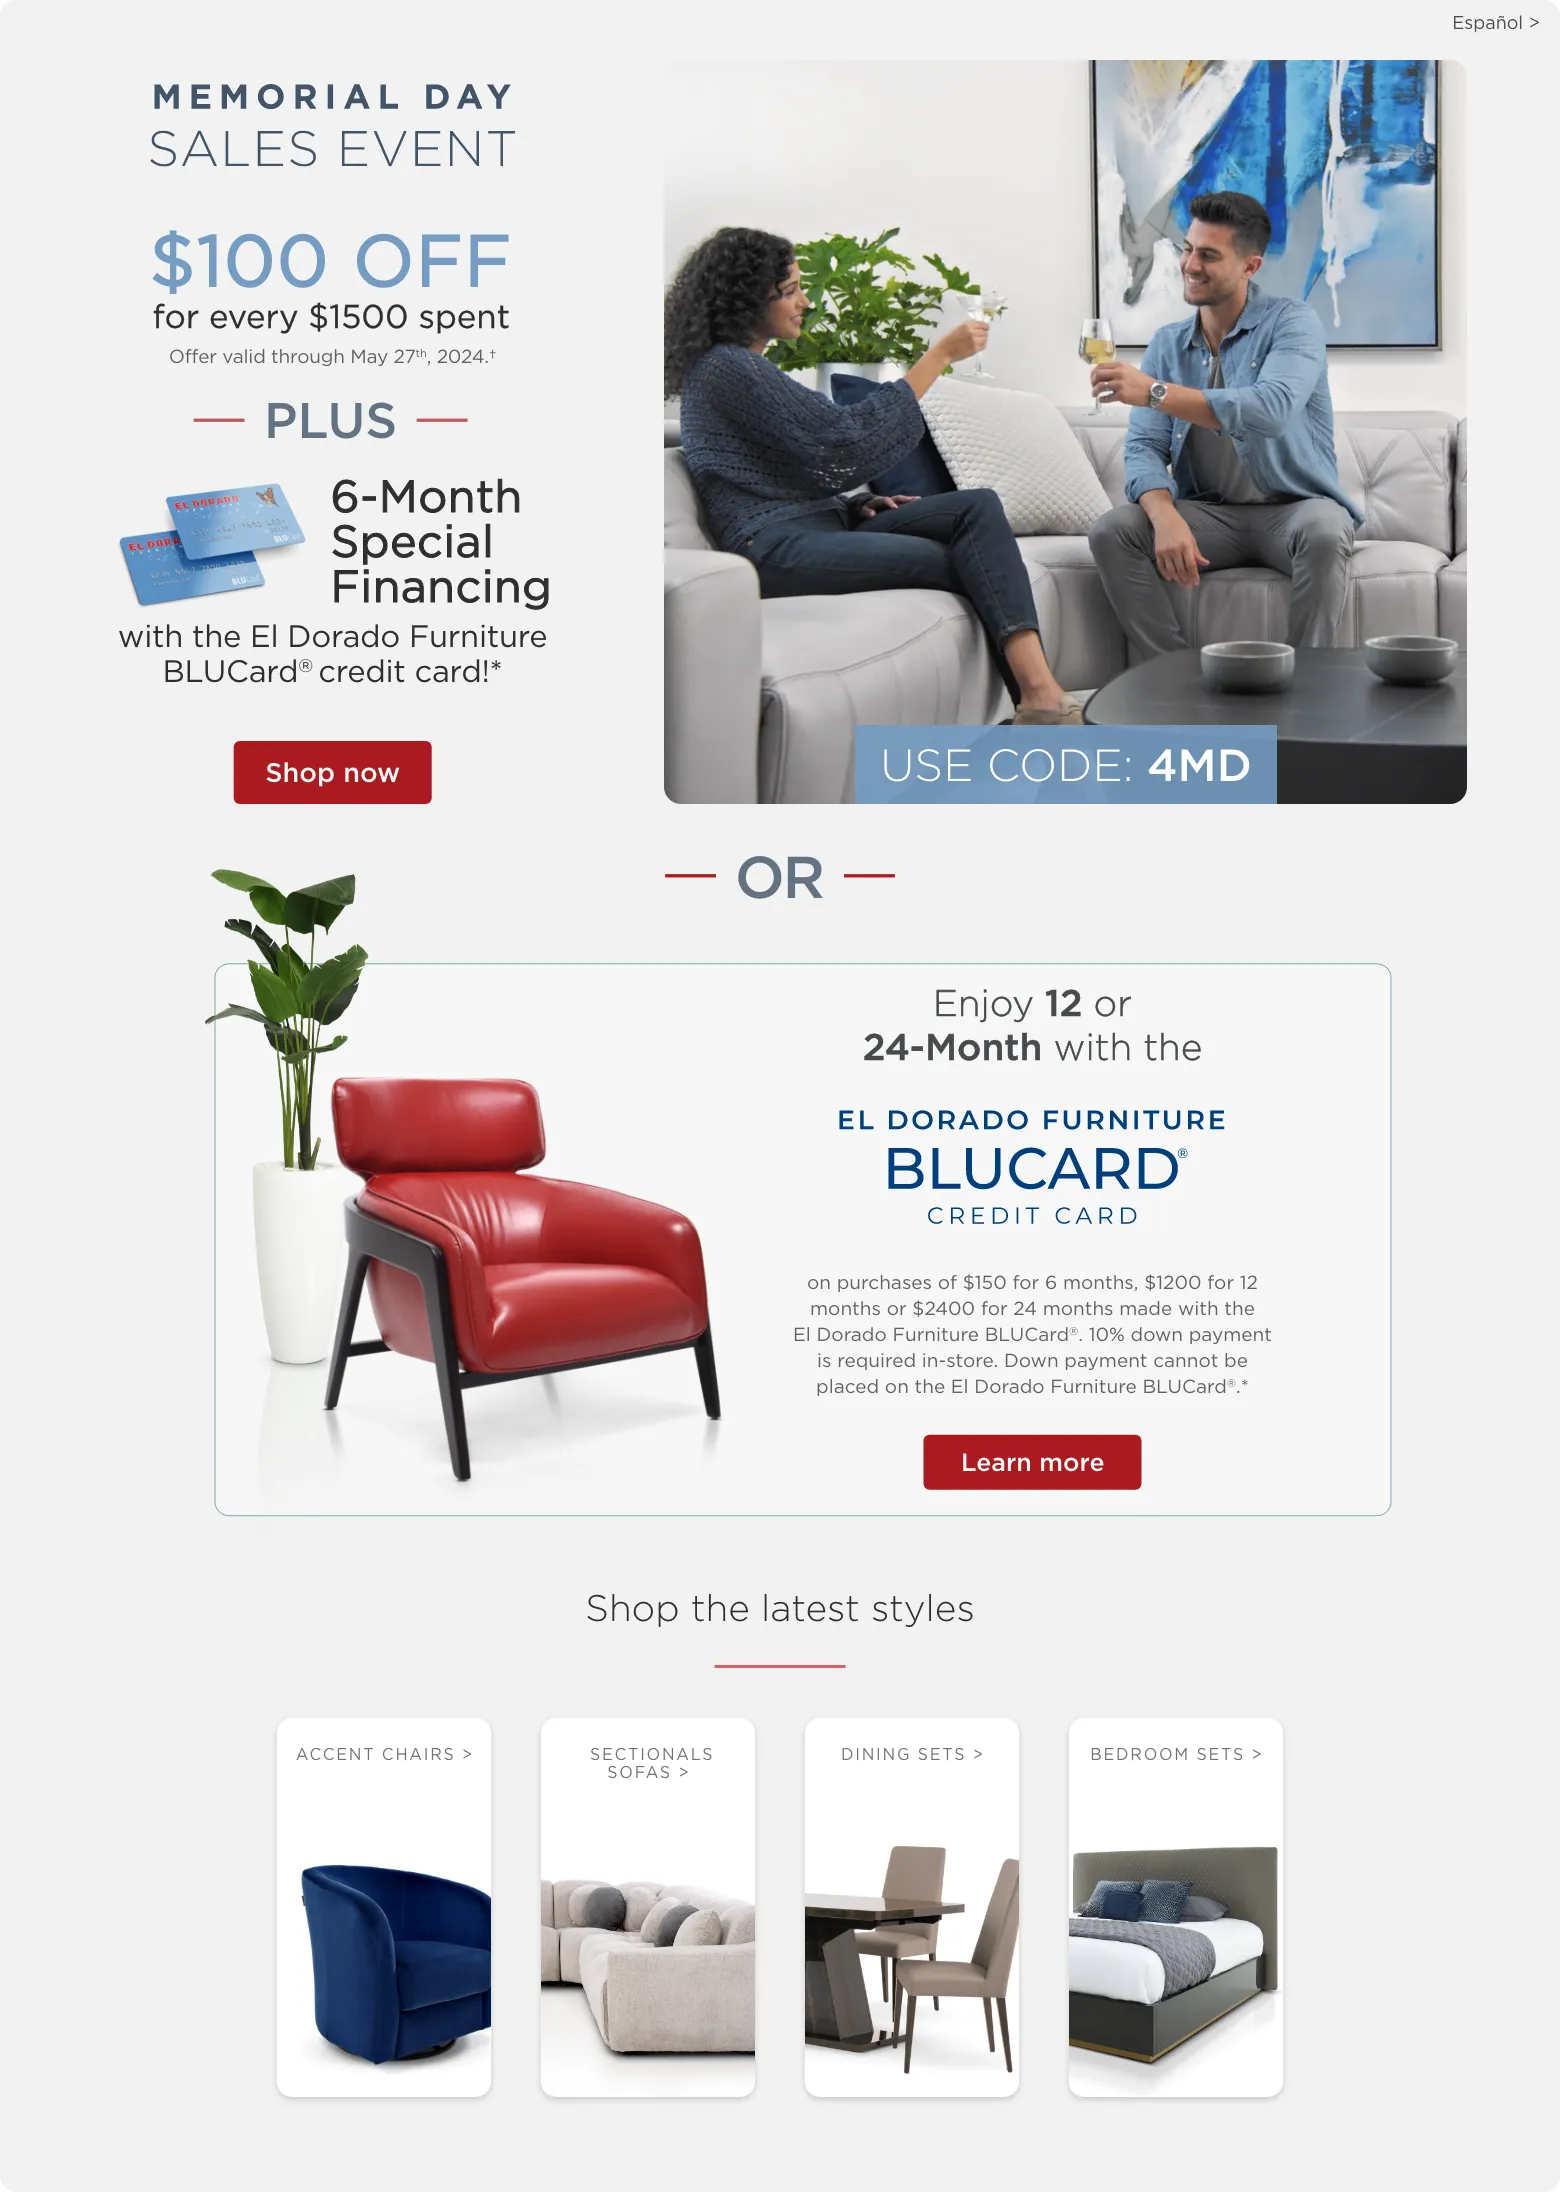 Memorial Day sales event. $100 off for every $1500 spent. Offer valid through May 27th, 2024.† Plus 6-Month Special Financing with the El Dorado Furniture BLUCard® credit card!* Shop now. Use code: 4MD. Or Enjoy 12 or 24-Month with the El Dorado Furniture BLUCard Credit Card. on purchases of $150 for 6 months, $1200 for 12 months or $2400 for 24 months made with the El Dorado Furniture BLUCard®. 10% down payment is required in-store. Down payment cannot be placed on the El Dorado Furniture BLUCard®.* Learn more. Shop the latest styles. Accent chairs. Leather sectionals. Dining sets. Bedroom sets.